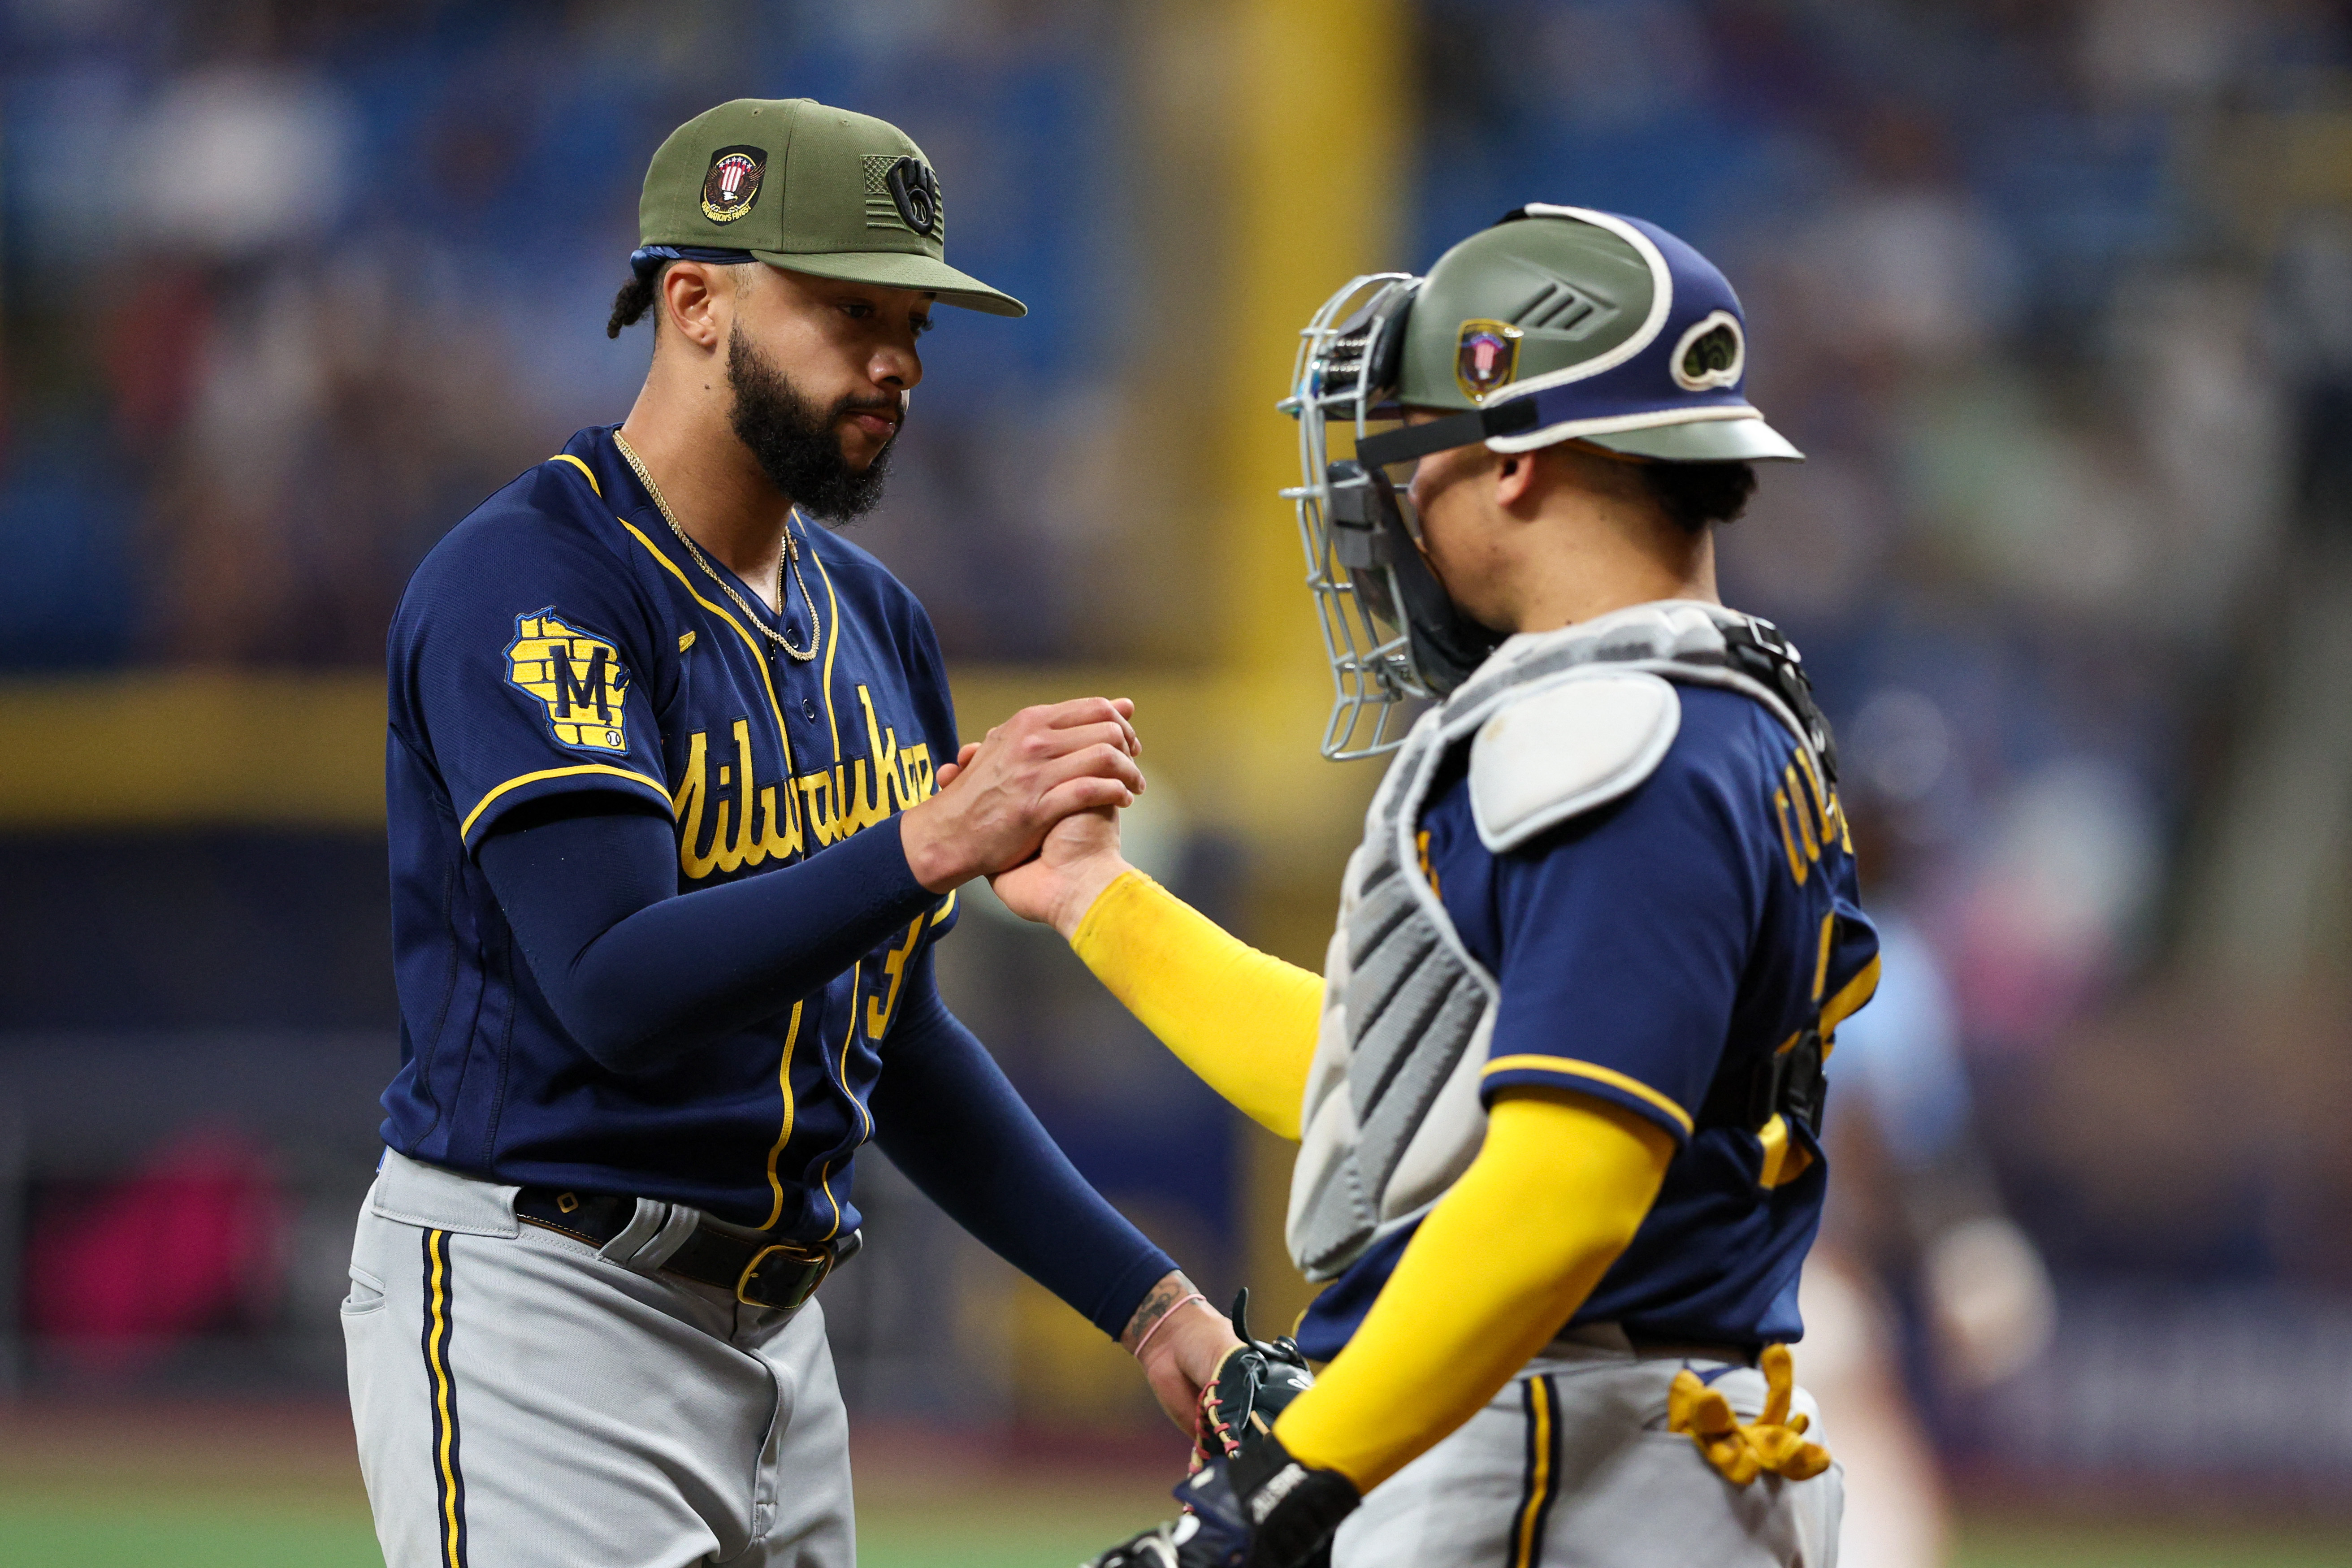 Brewers: Taking to the field in new uniforms